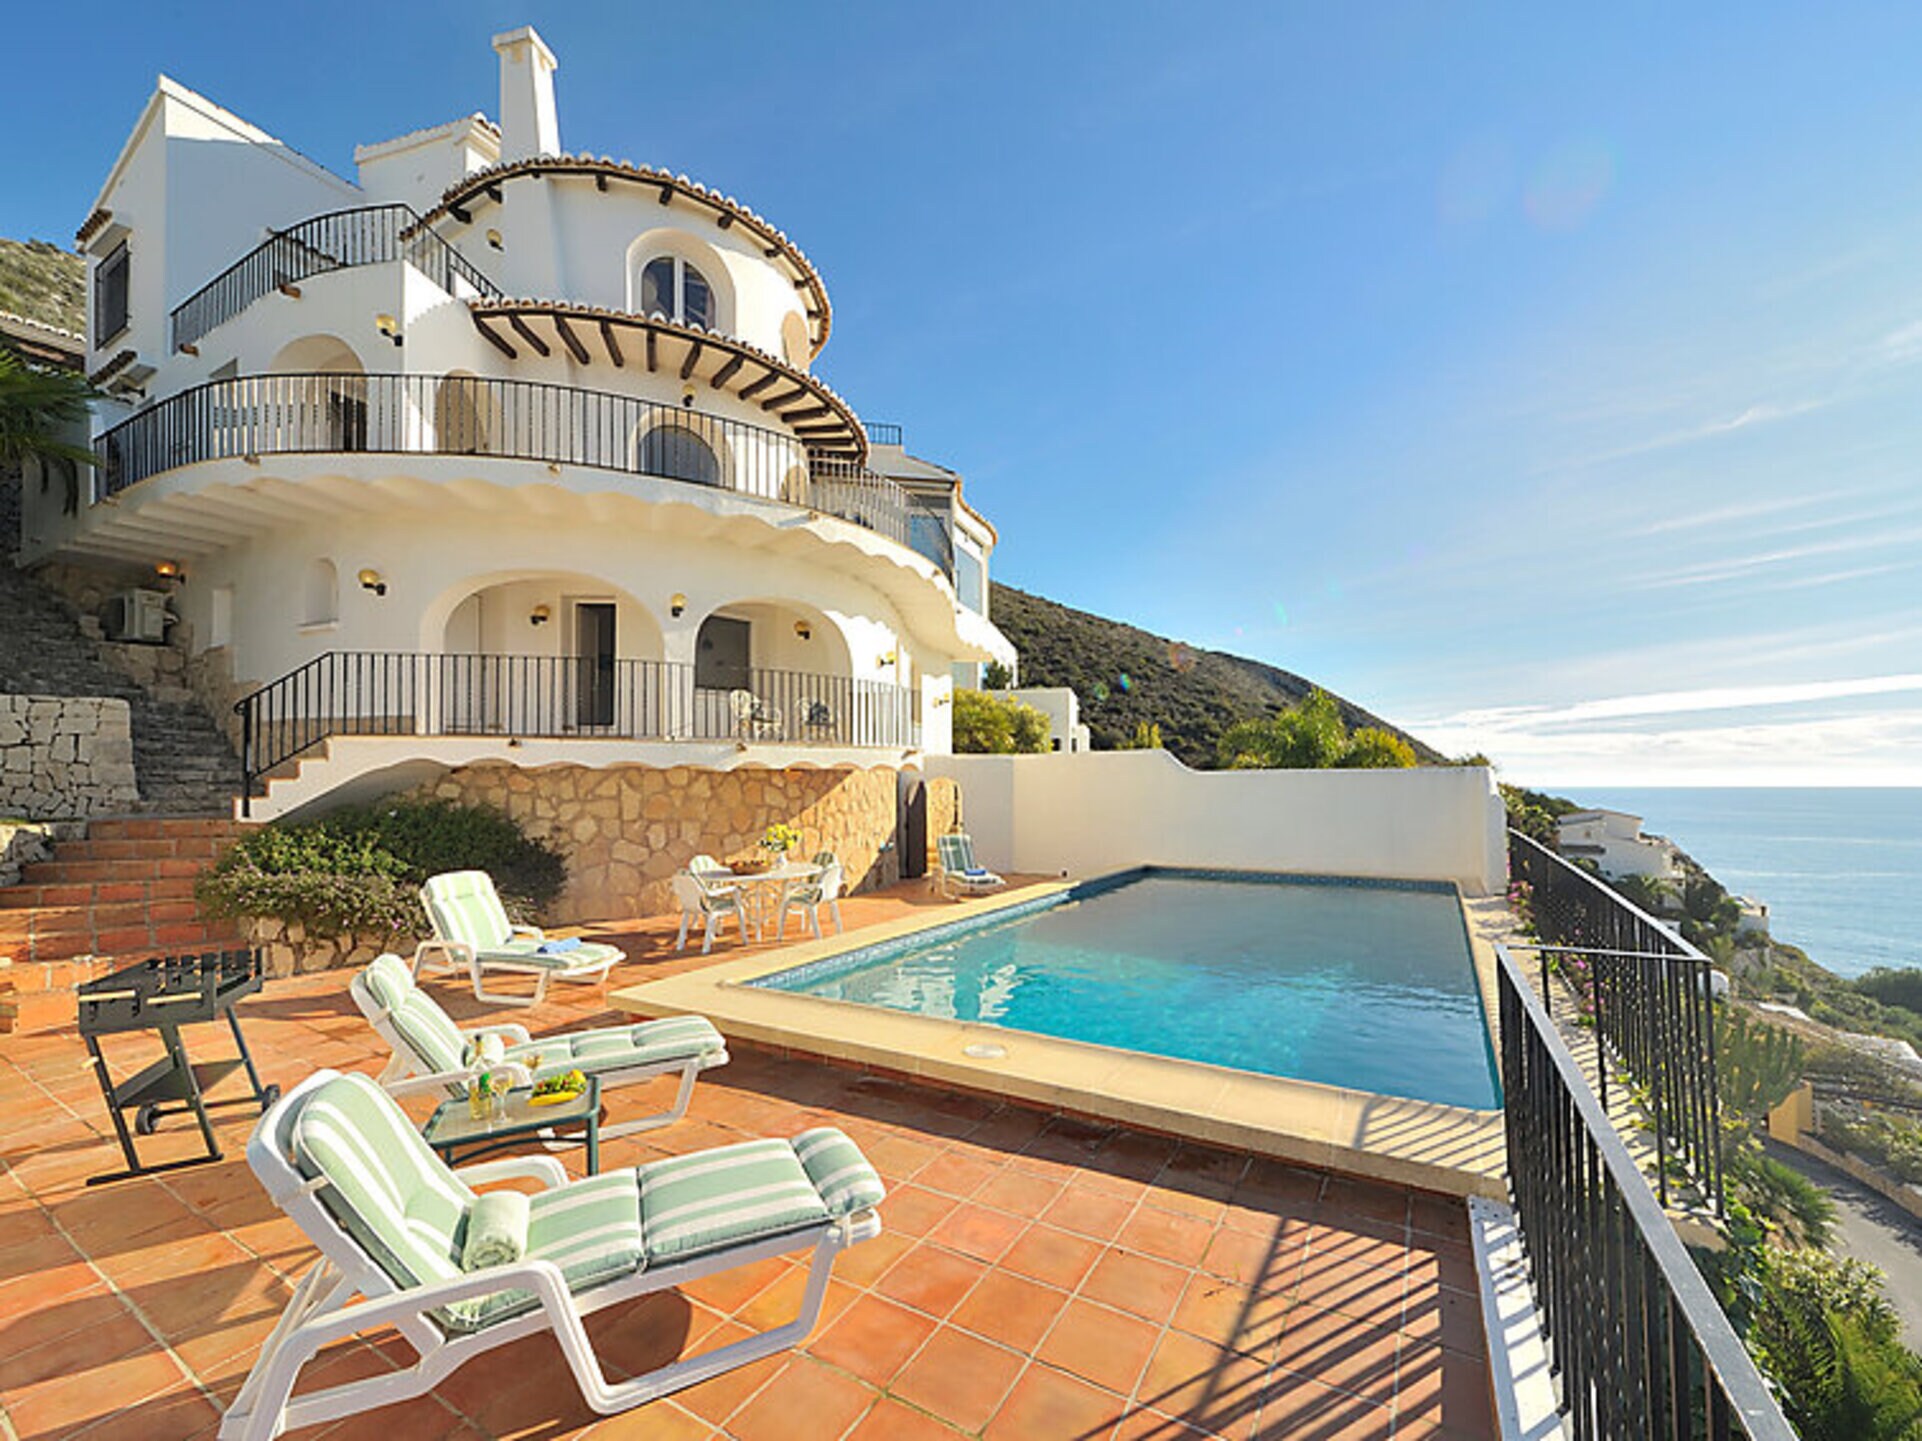 Property Image 1 - Property Manager Villa with Majestic Views, Costa Blanca Villa 1134